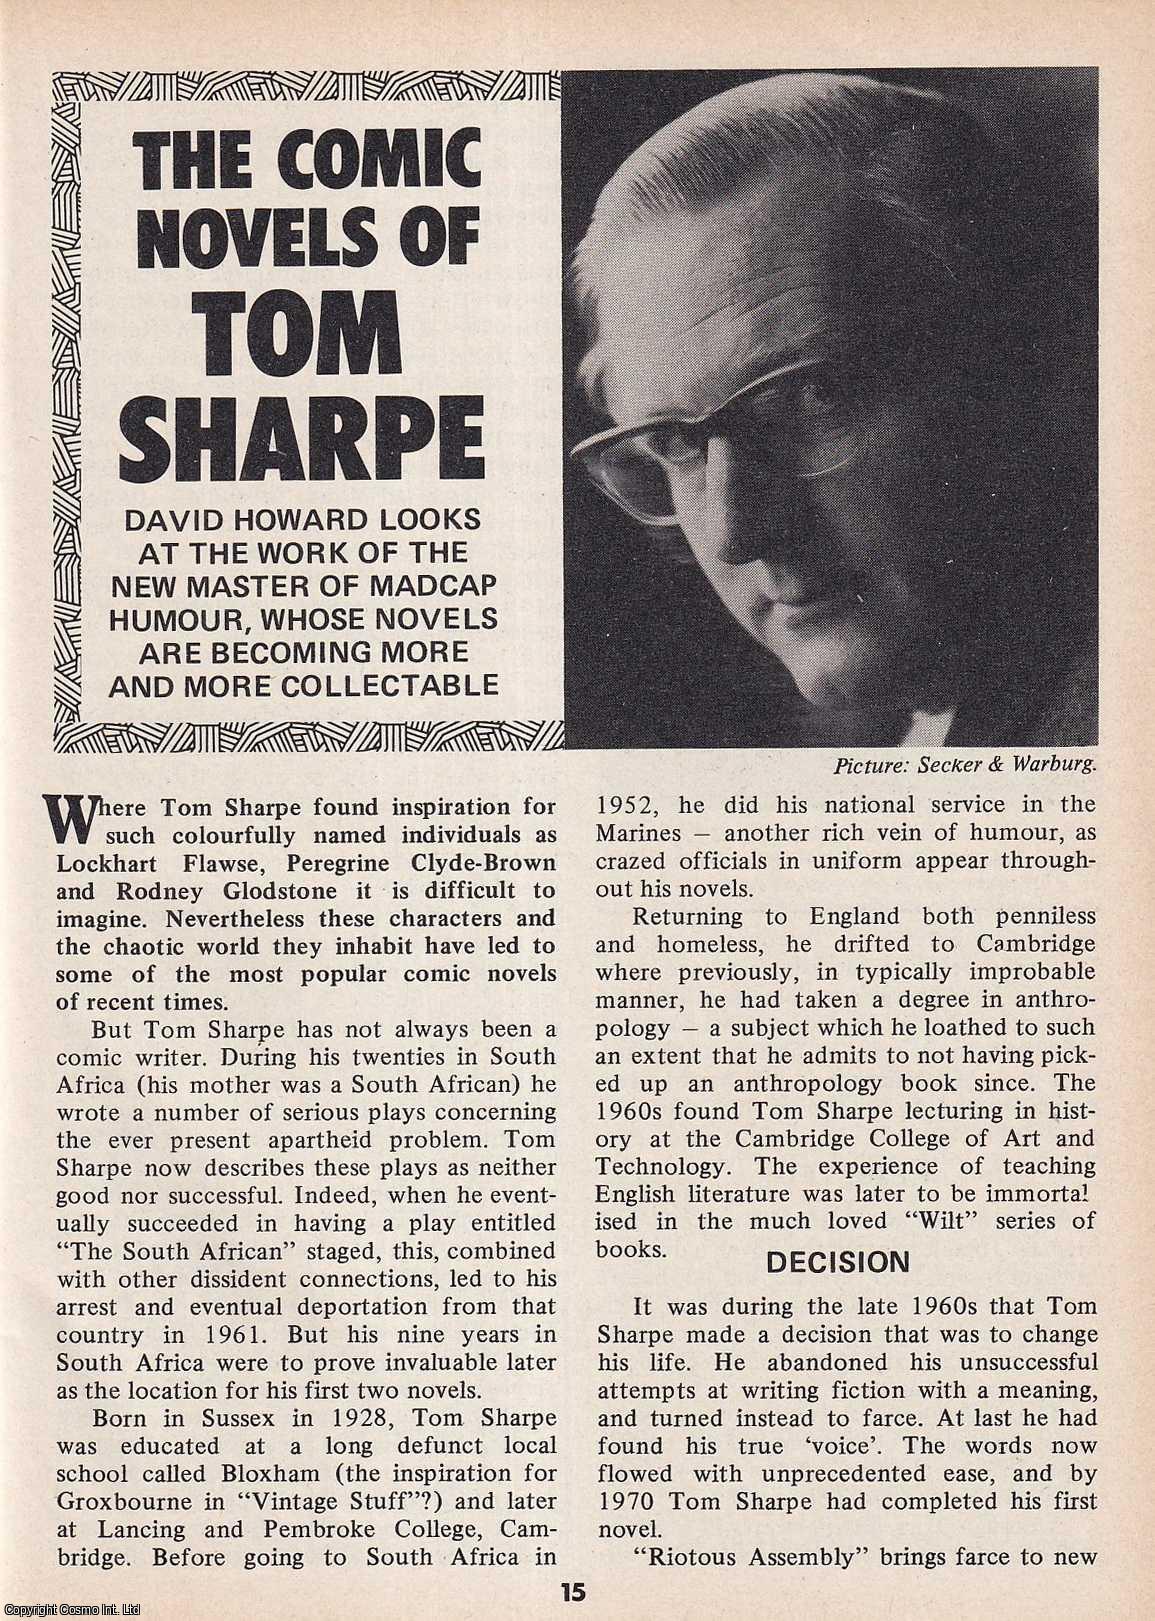 David Howard - The Comic Novels of Tom Sharpe. This is an original article separated from an issue of The Book & Magazine Collector publication, 1987.